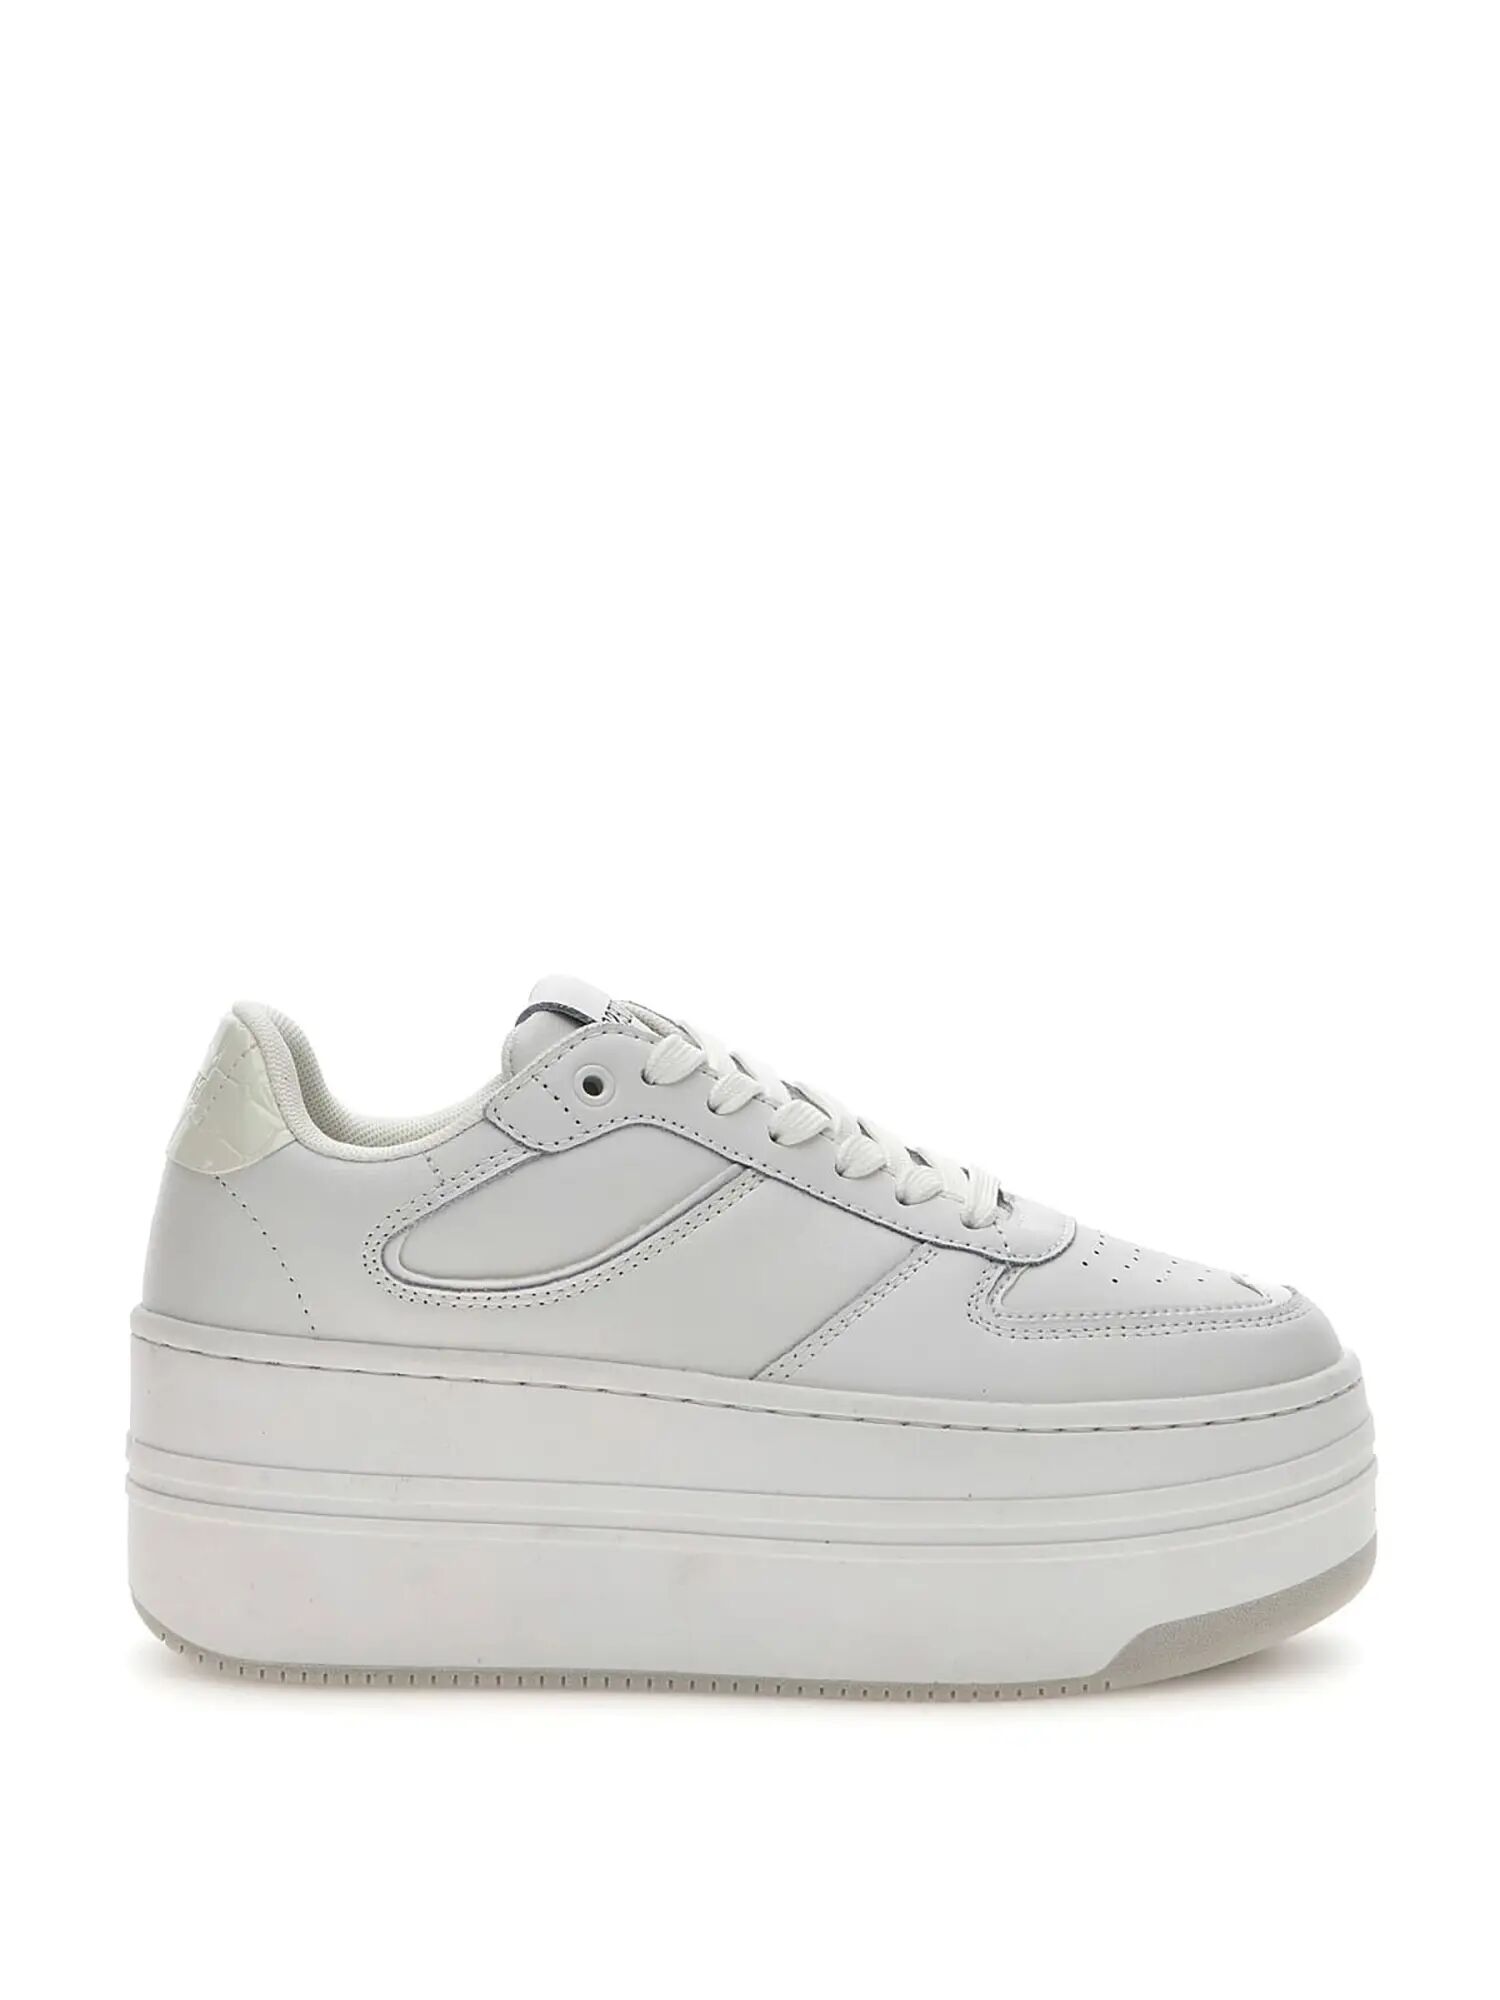 Guess Sneakers Bianche Donna BIANCO 38